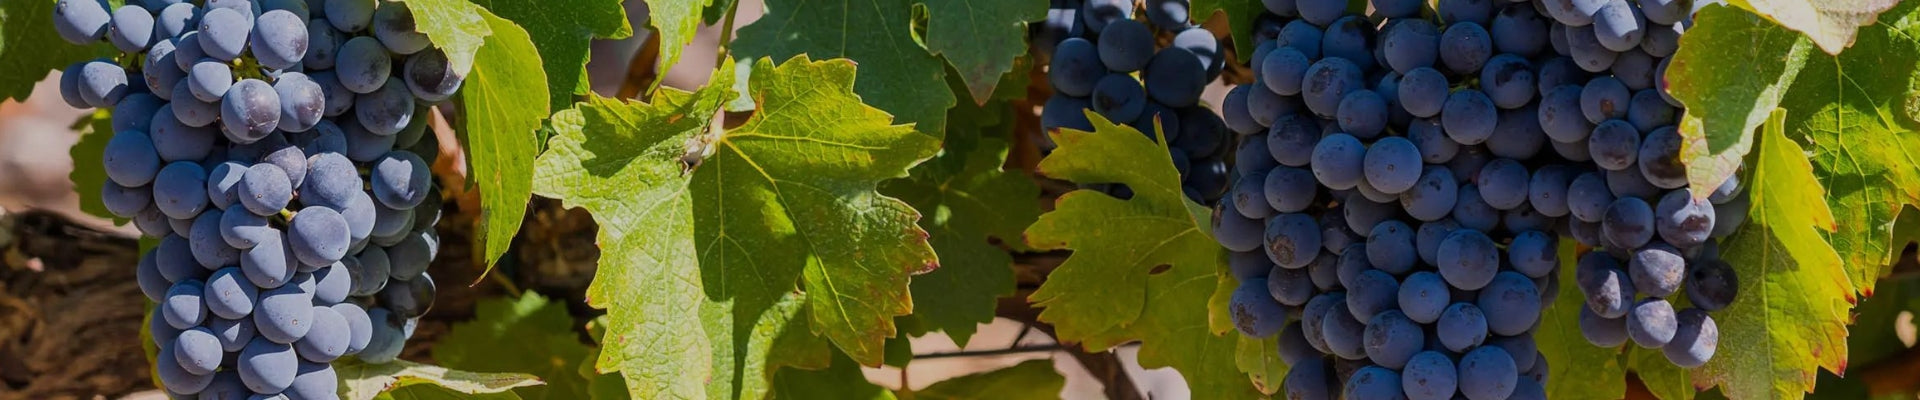 Image of Pinotage grapes to illustrate Pinotage collection by Whelehans Wines. 